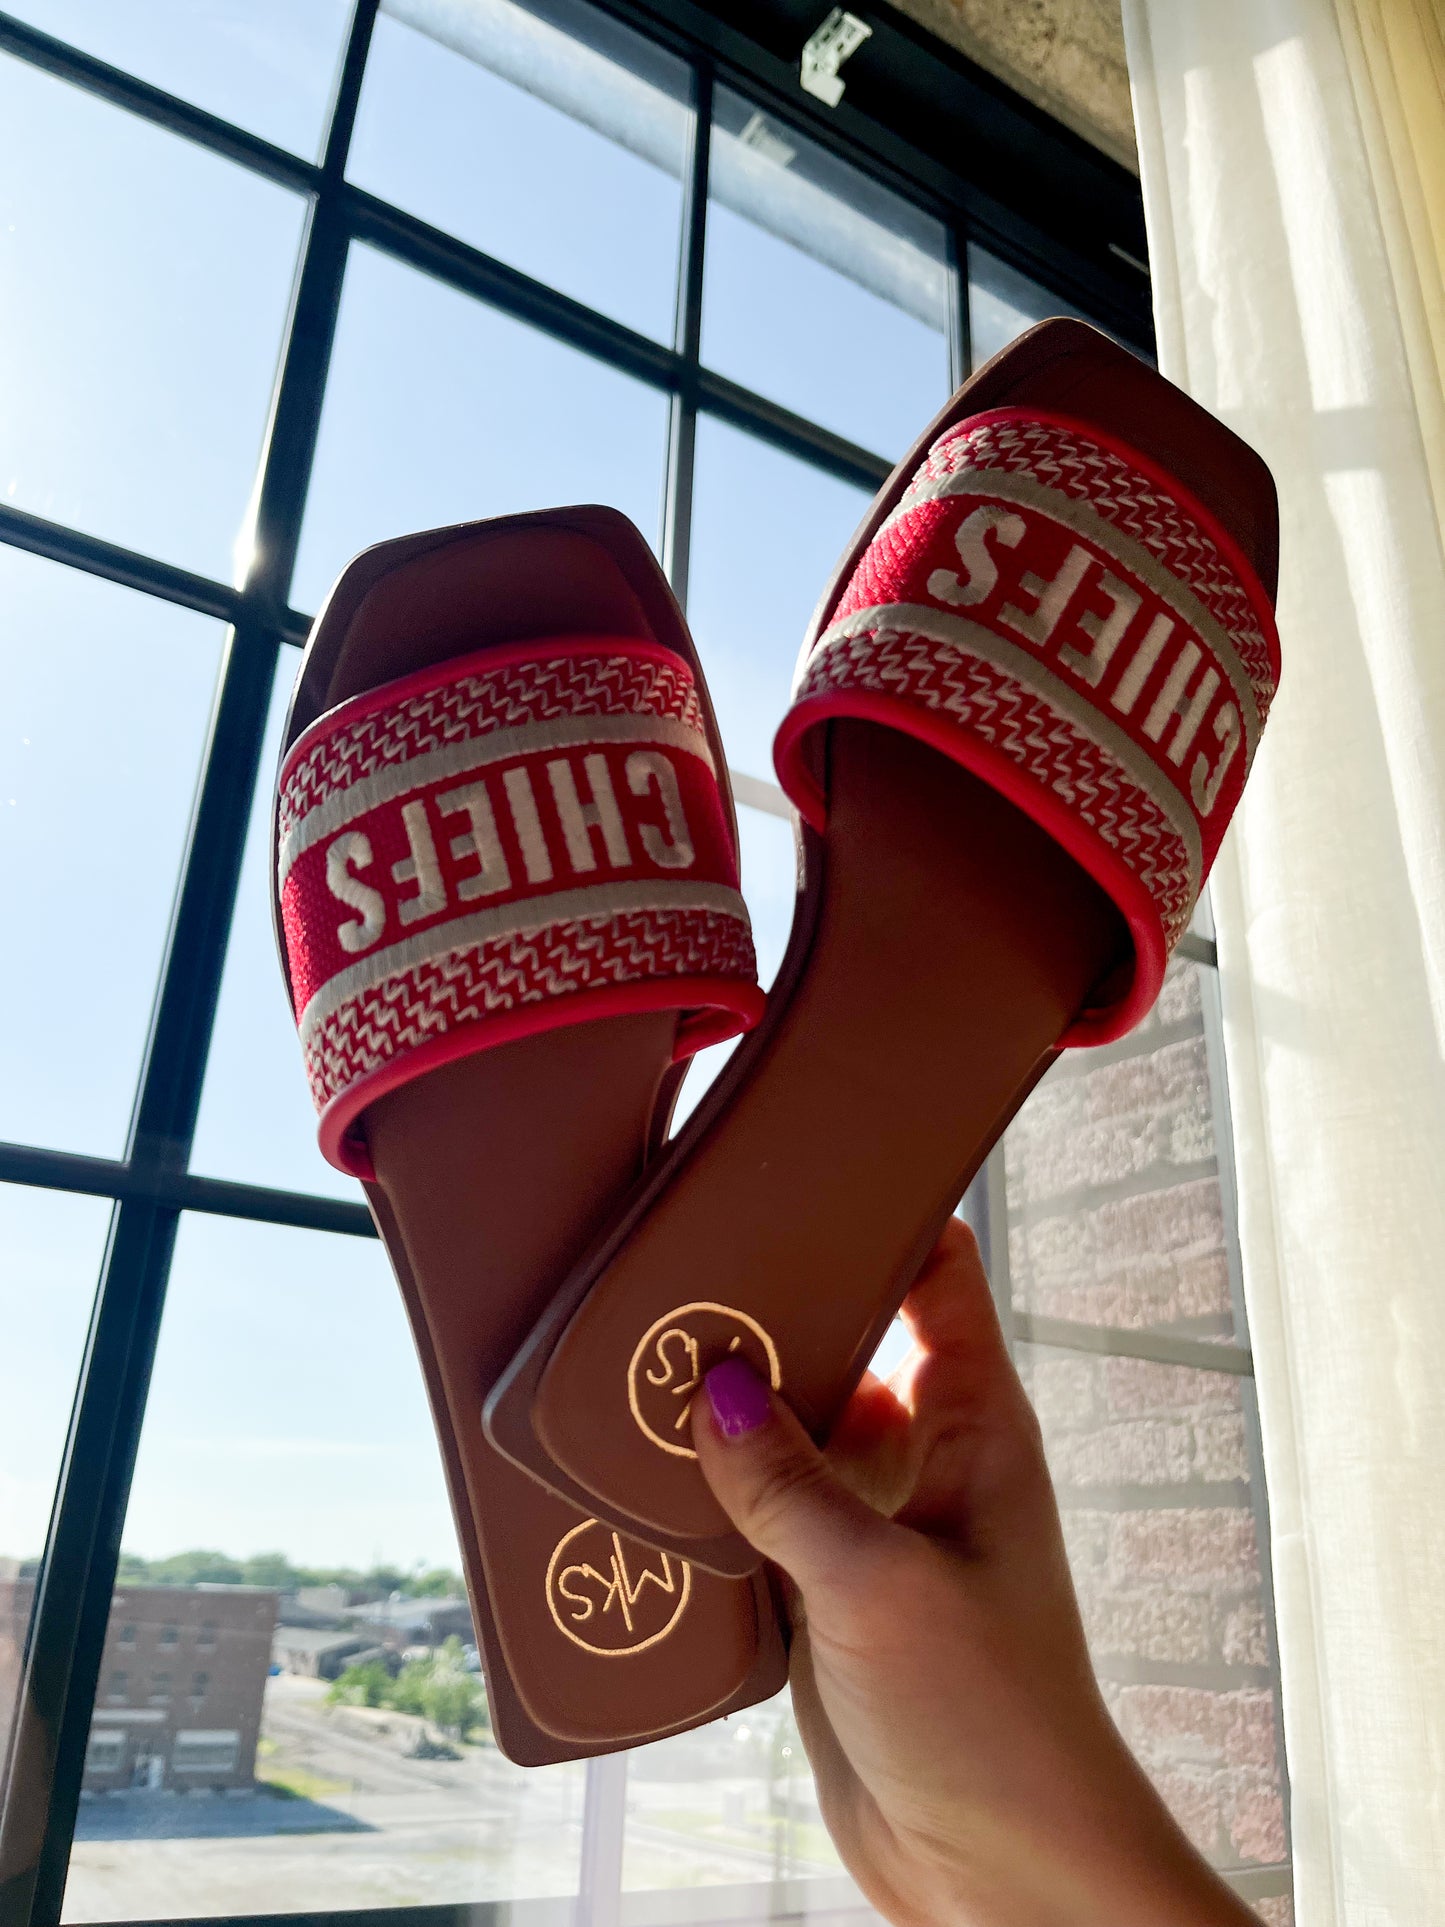 Go Chiefs Embroidered Sandals